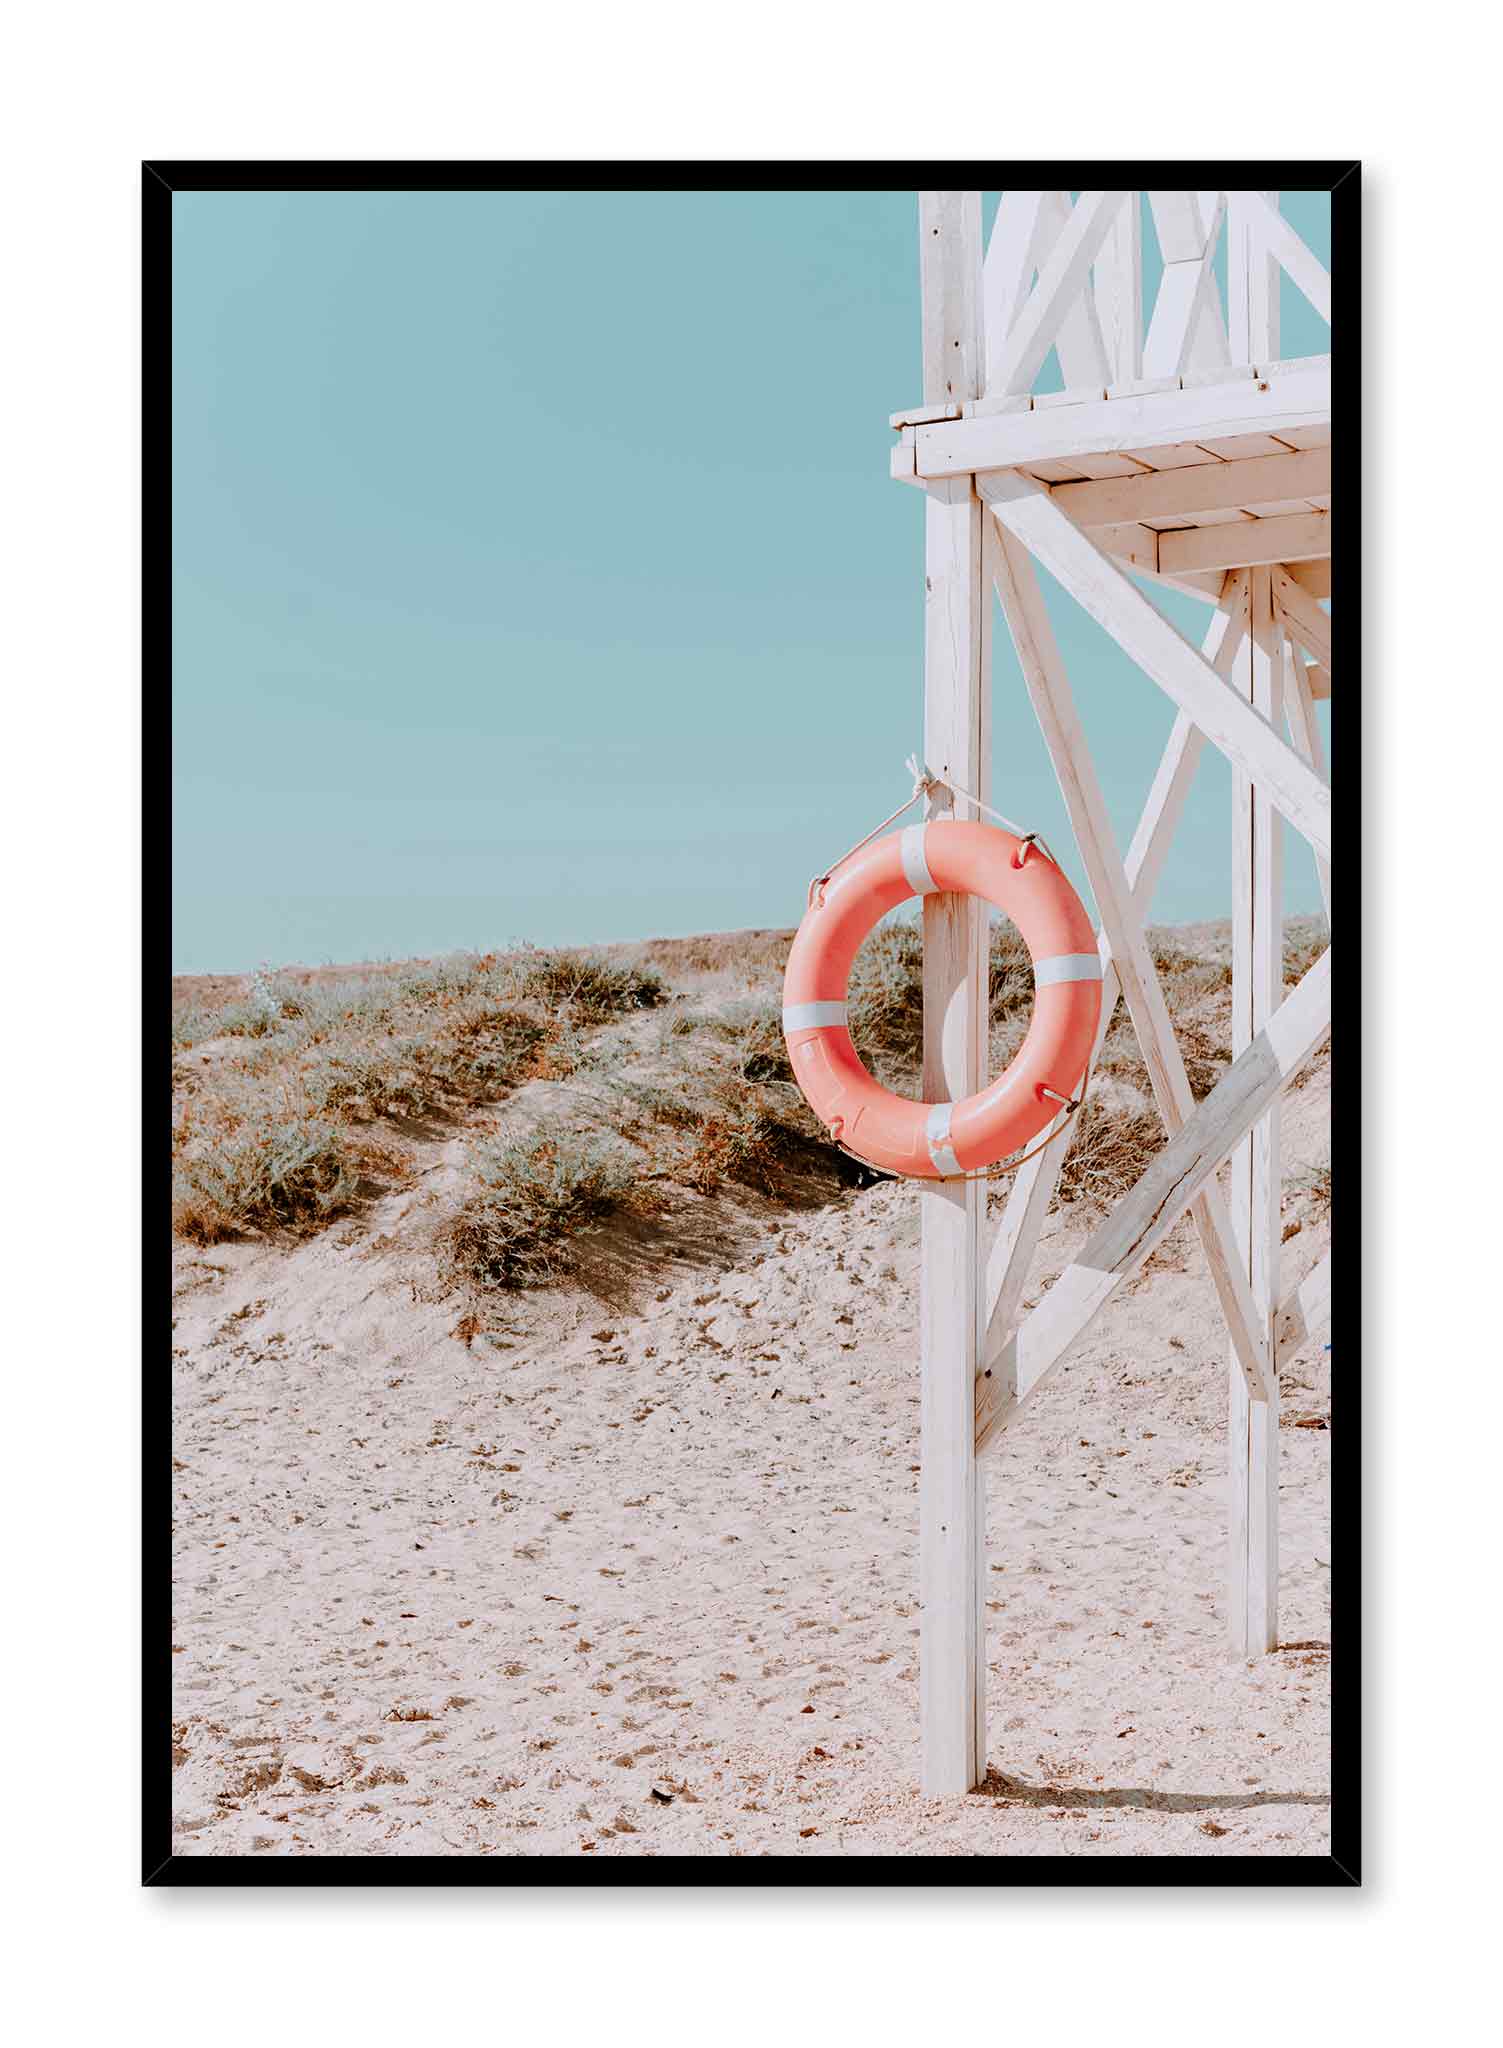 Safety First is a minimalist photography of a bright orange life ring hung on the pole of a lifeguard chair by Opposite Wall.